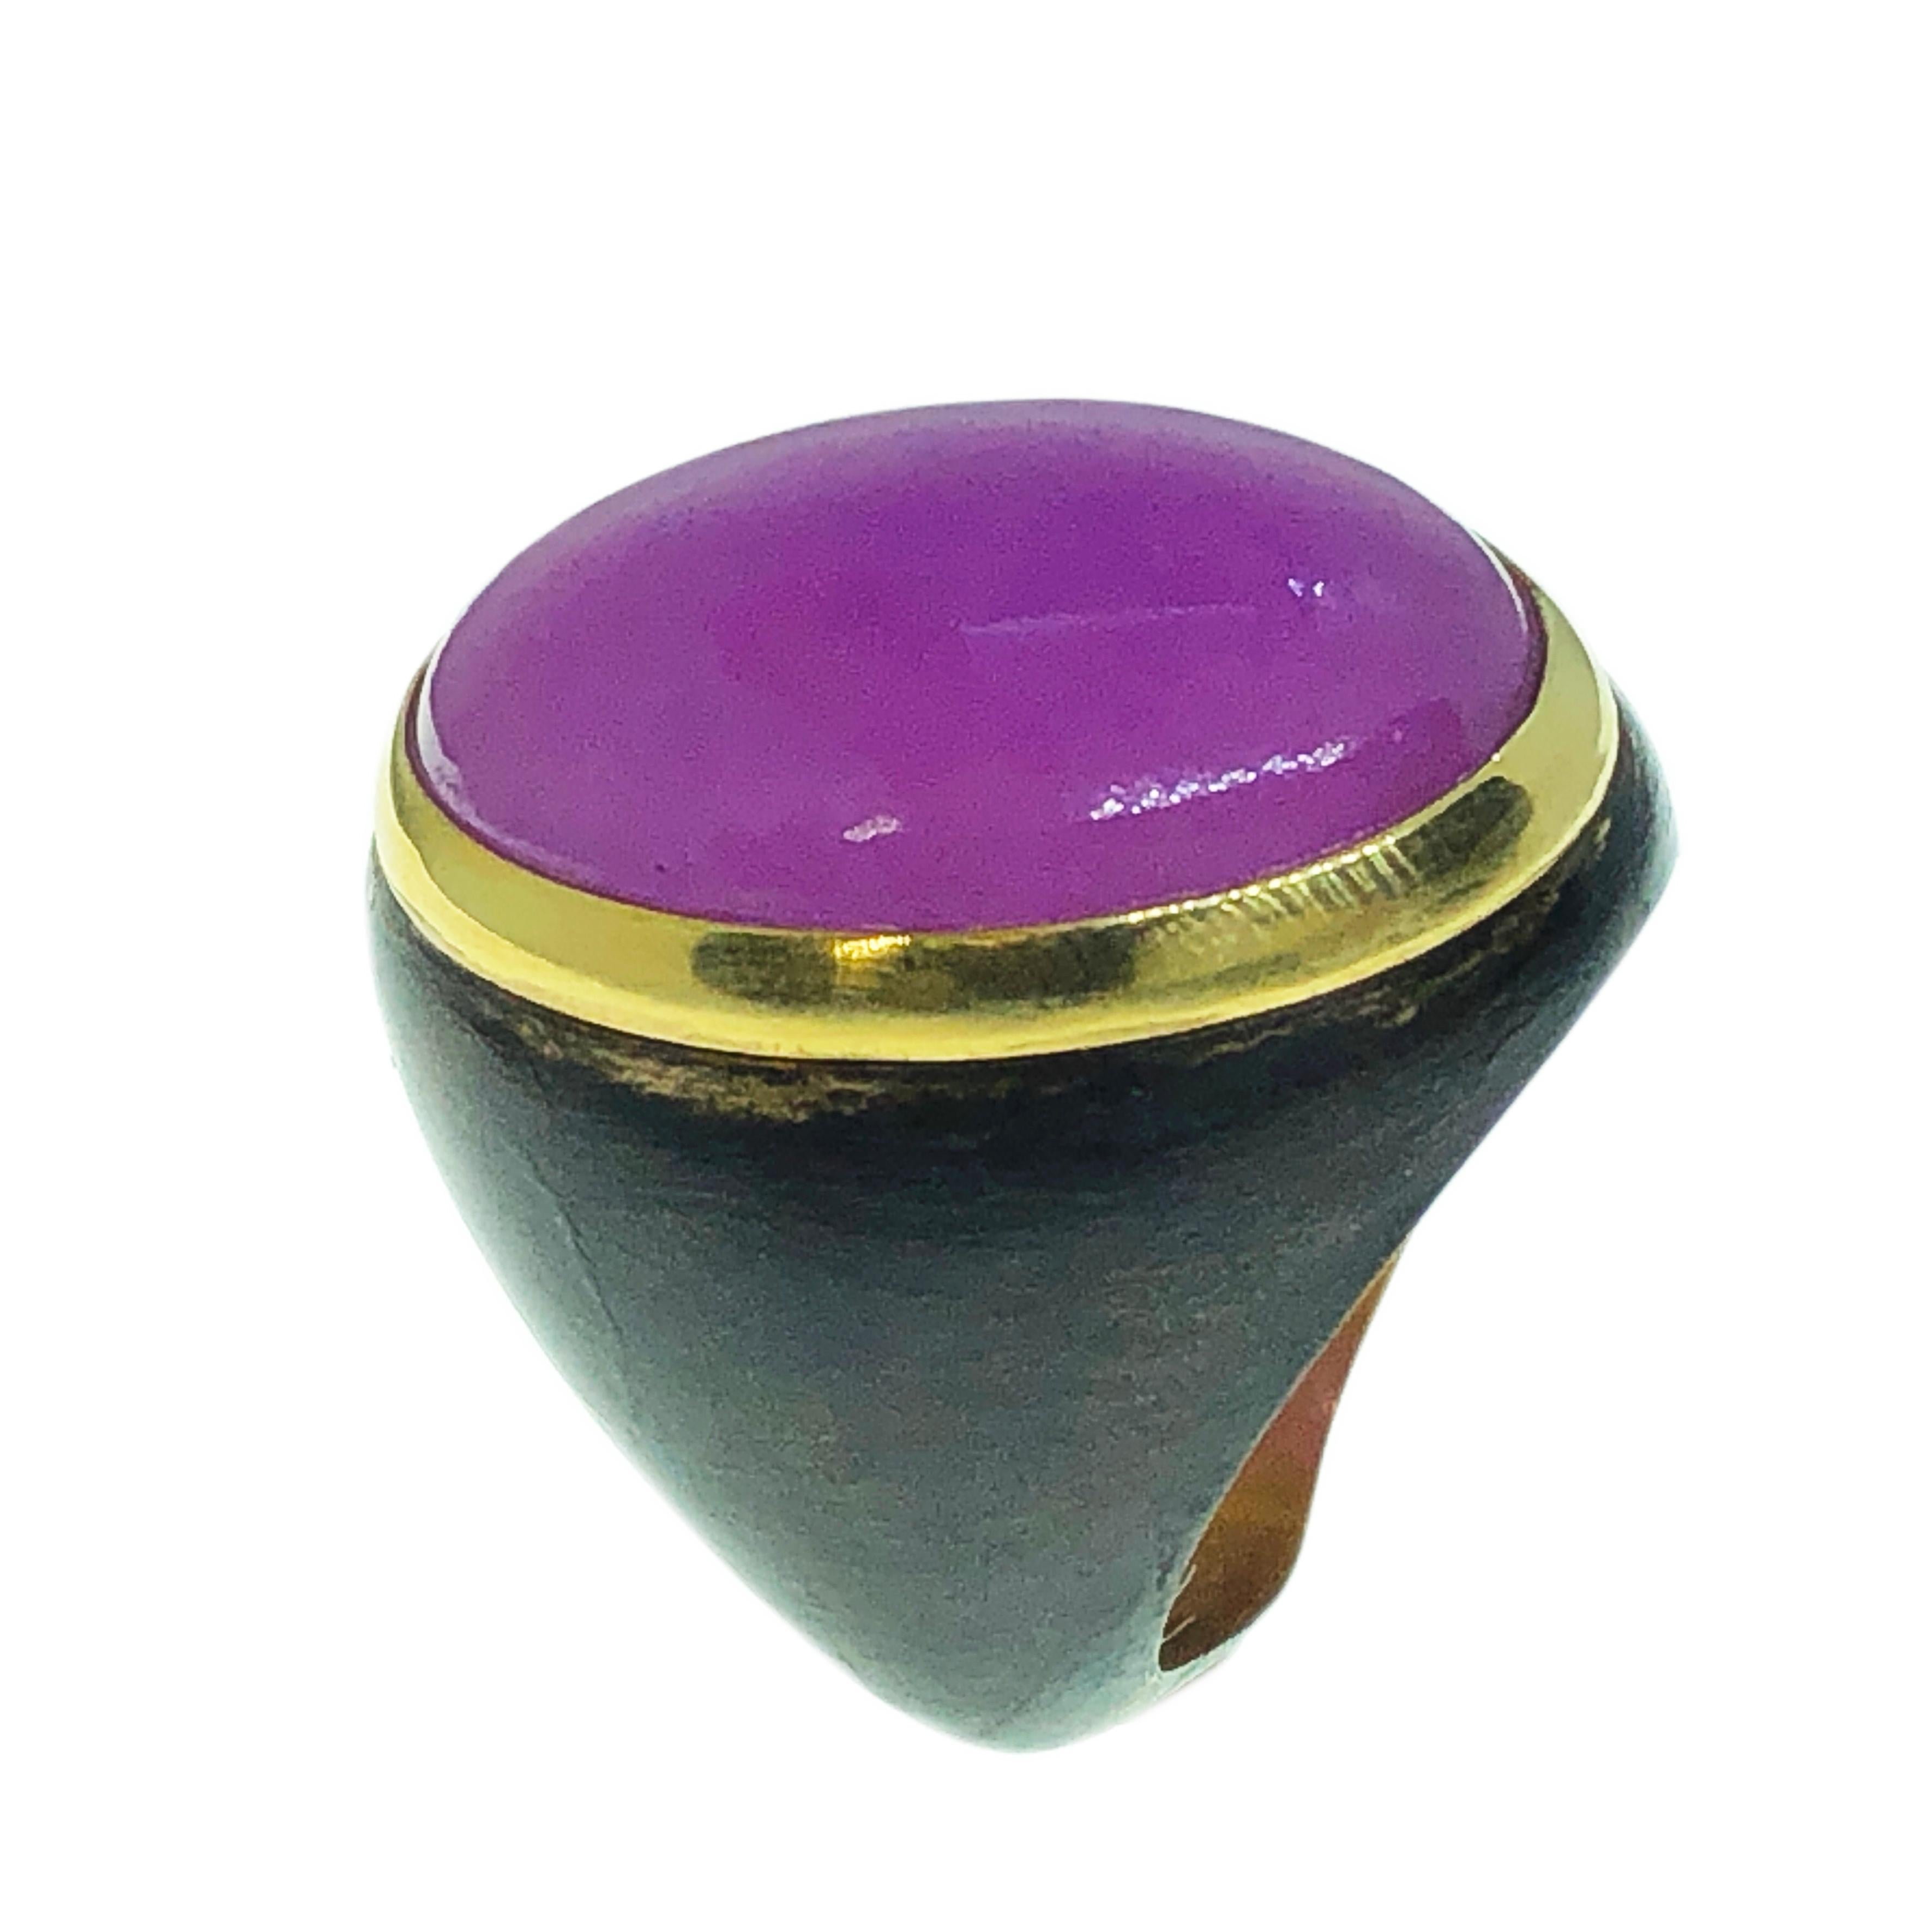 One-of-a-kind Contemporary Cocktail Ring Featuring a 22 Carat Natural Lavender Jade Cabochon (0.911x0.666in) in an 18K Yellow Gold Brown Hand Oxidized Brass Setting.
The color-changing of the Lavender Jade's cabochon combined with the gold and brown